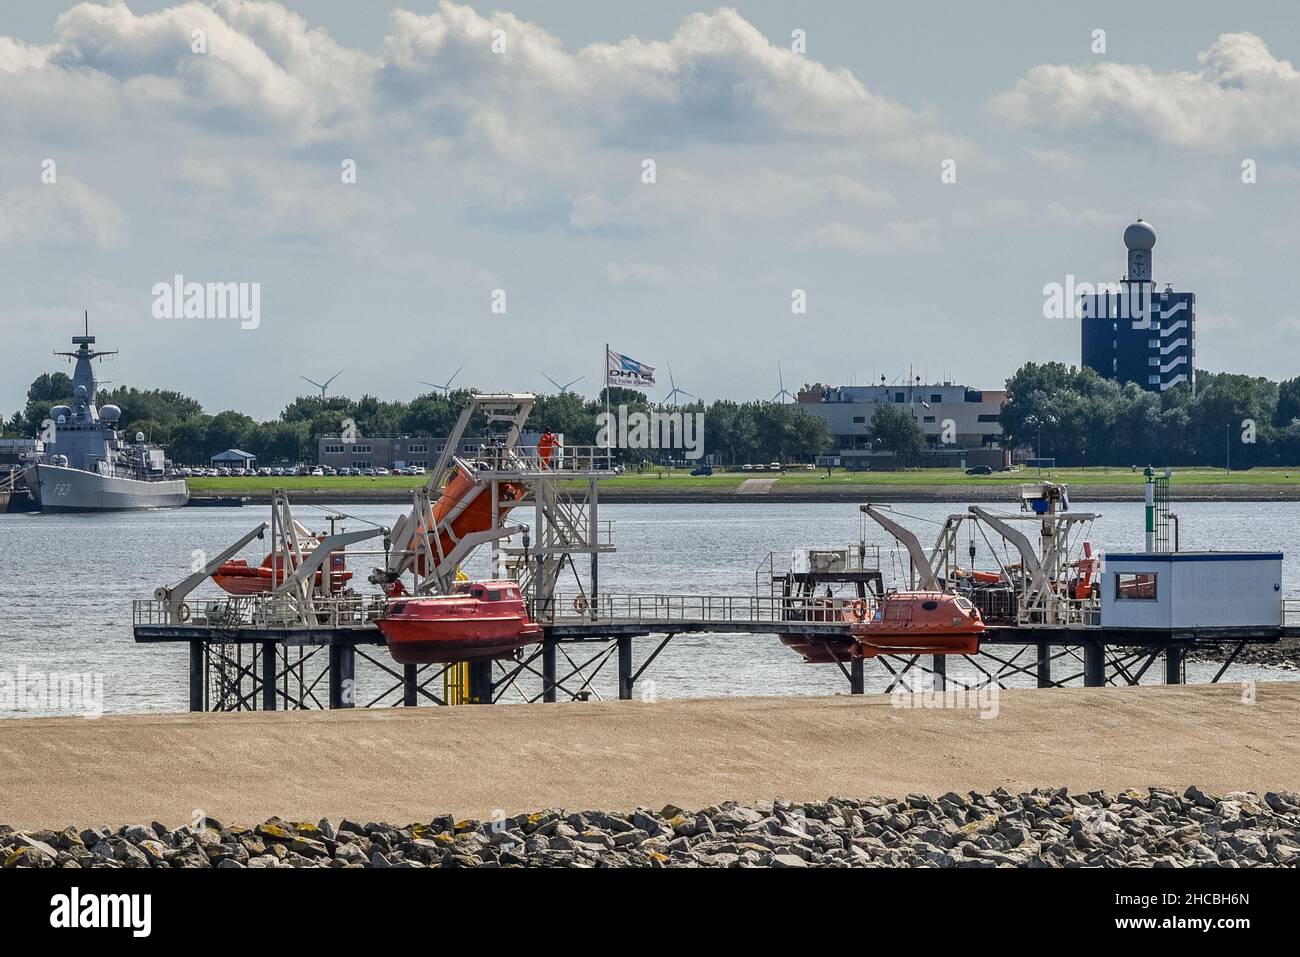 Den Helder, the Netherlands. September 2021. Training facility for survival crafts and rescue boats in the harbor of Den Helder. High quality photo Stock Photo